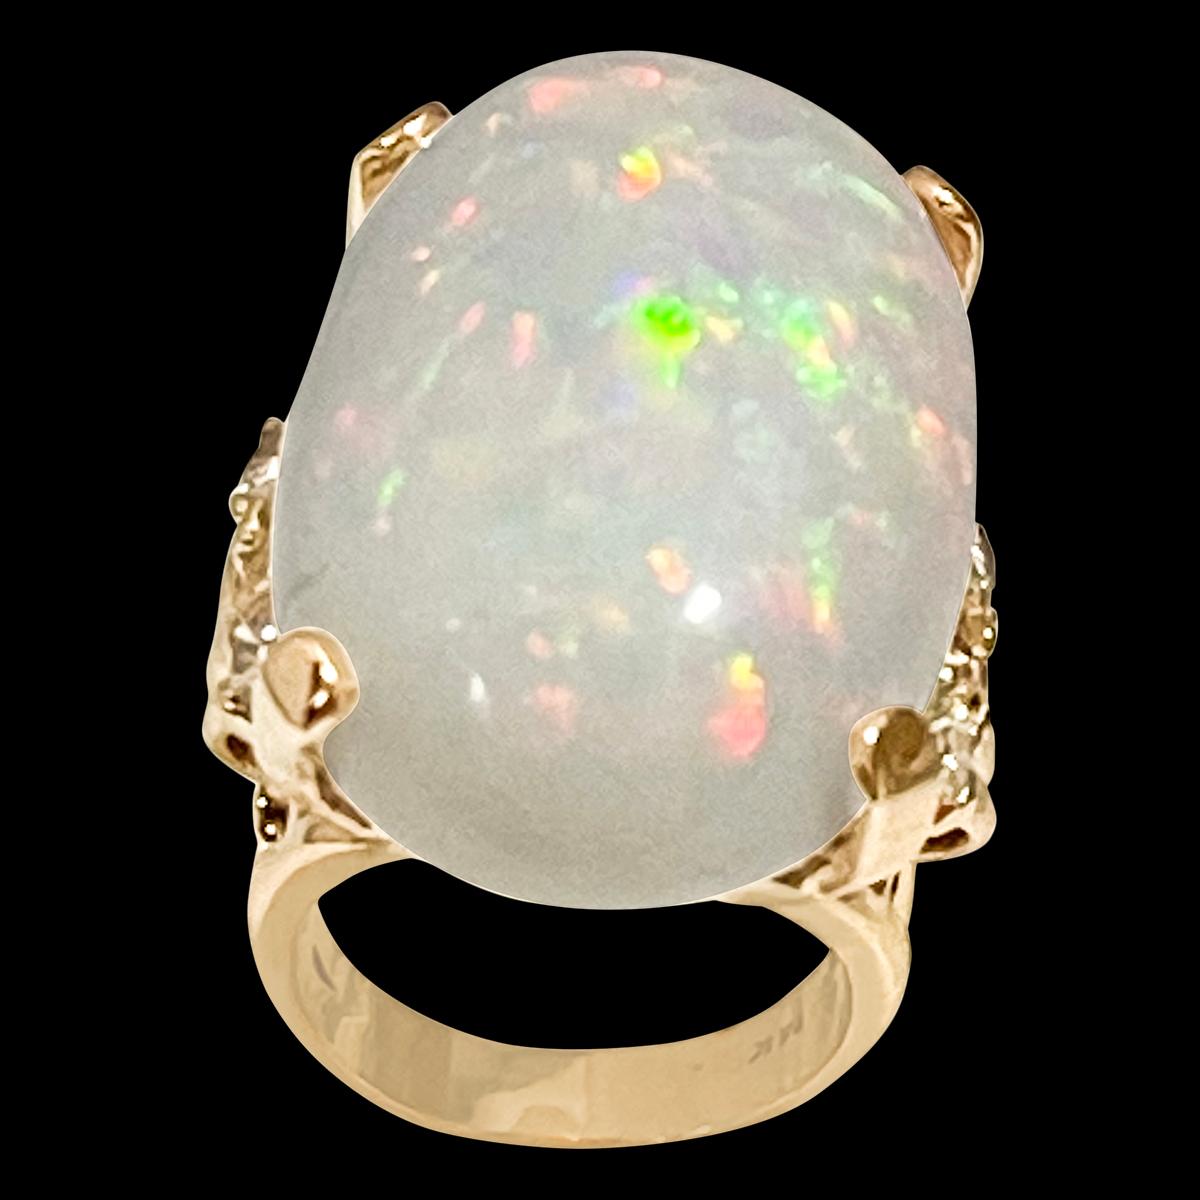 approximately 50  Carat Oval Shape Ethiopian Opal & Diamond  Cocktail Ring 14 Karat Yellow Gold
Oval  Natural Opal  A classic, Cocktail ring 
14 Karat Yellow  Gold Estate
Ring size 7
3 Round brilliant cut diamonds approximately on each side of the